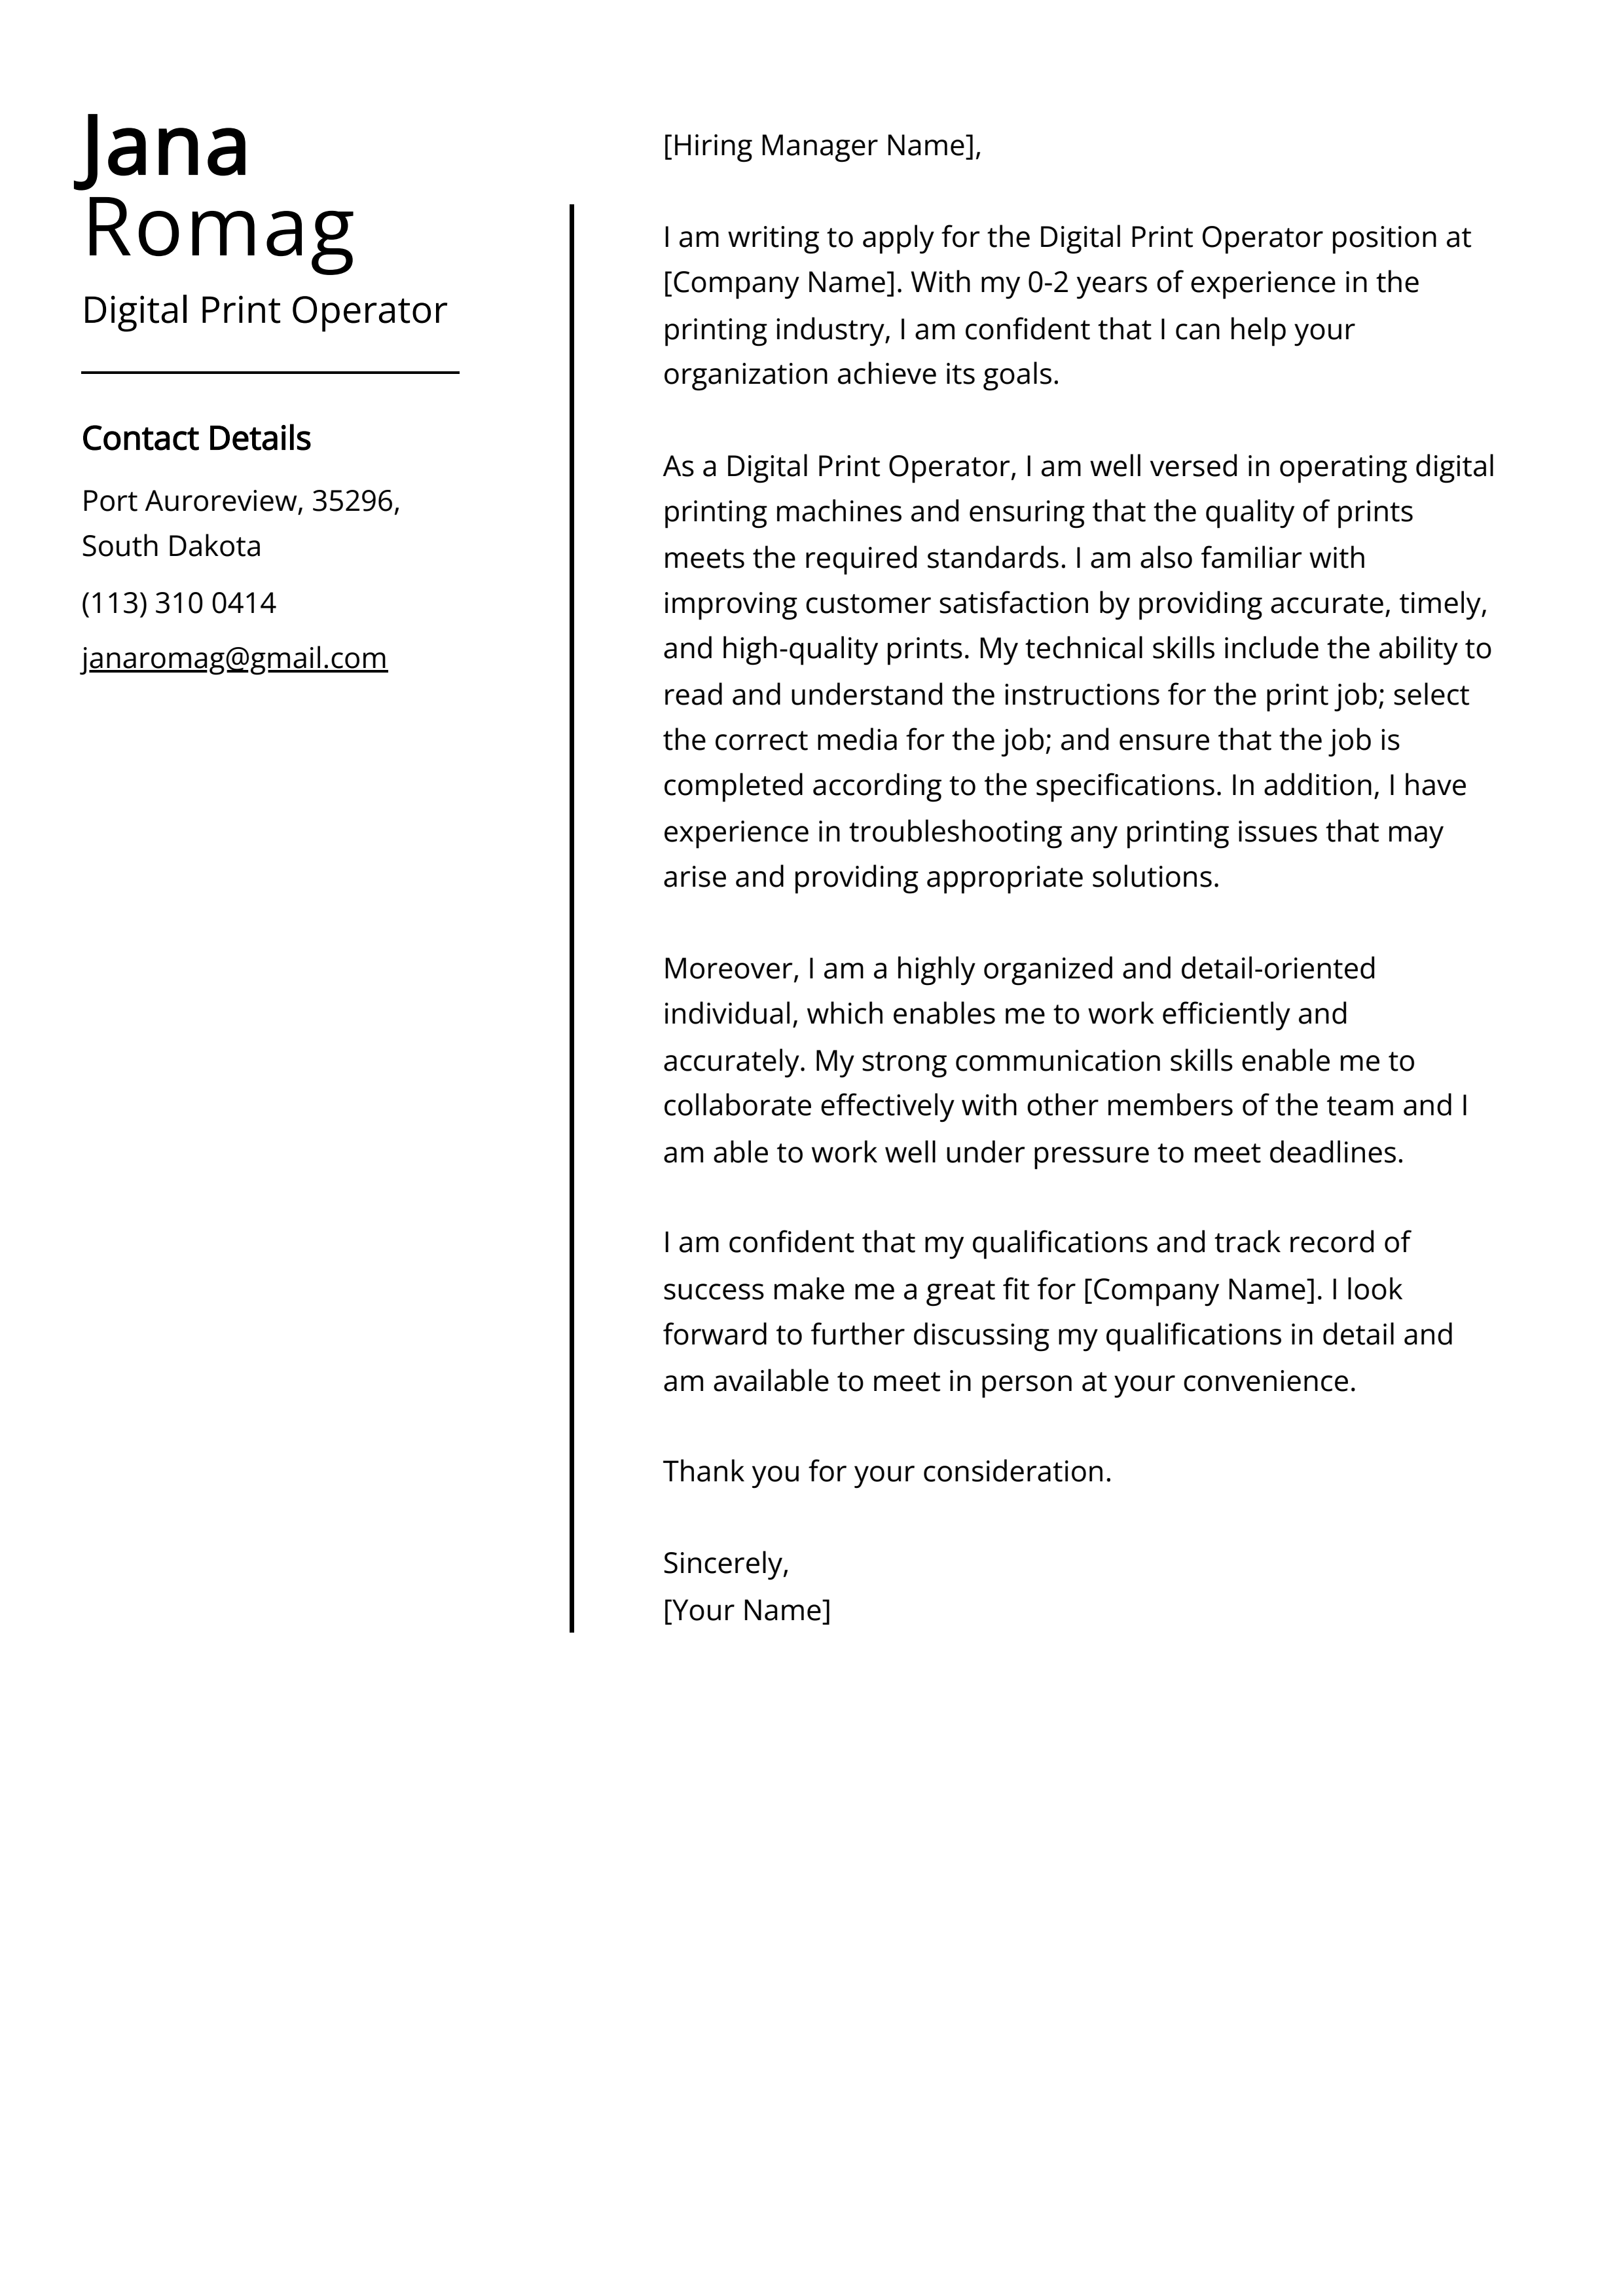 Digital Print Operator Cover Letter Example